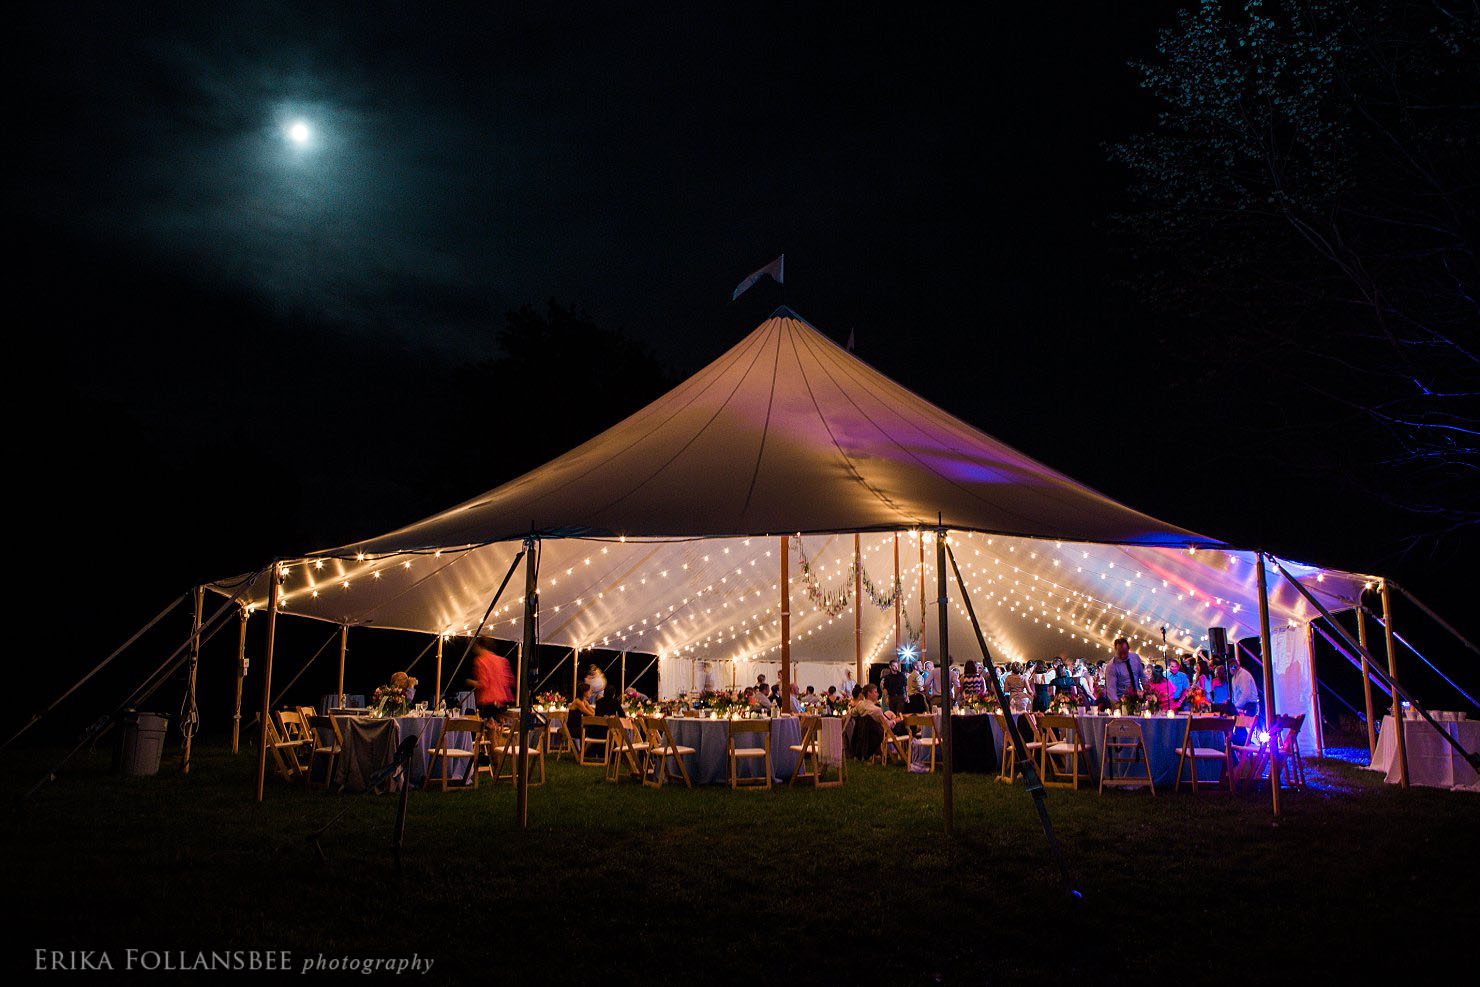 Night photo of the tent lit up by bistro lights